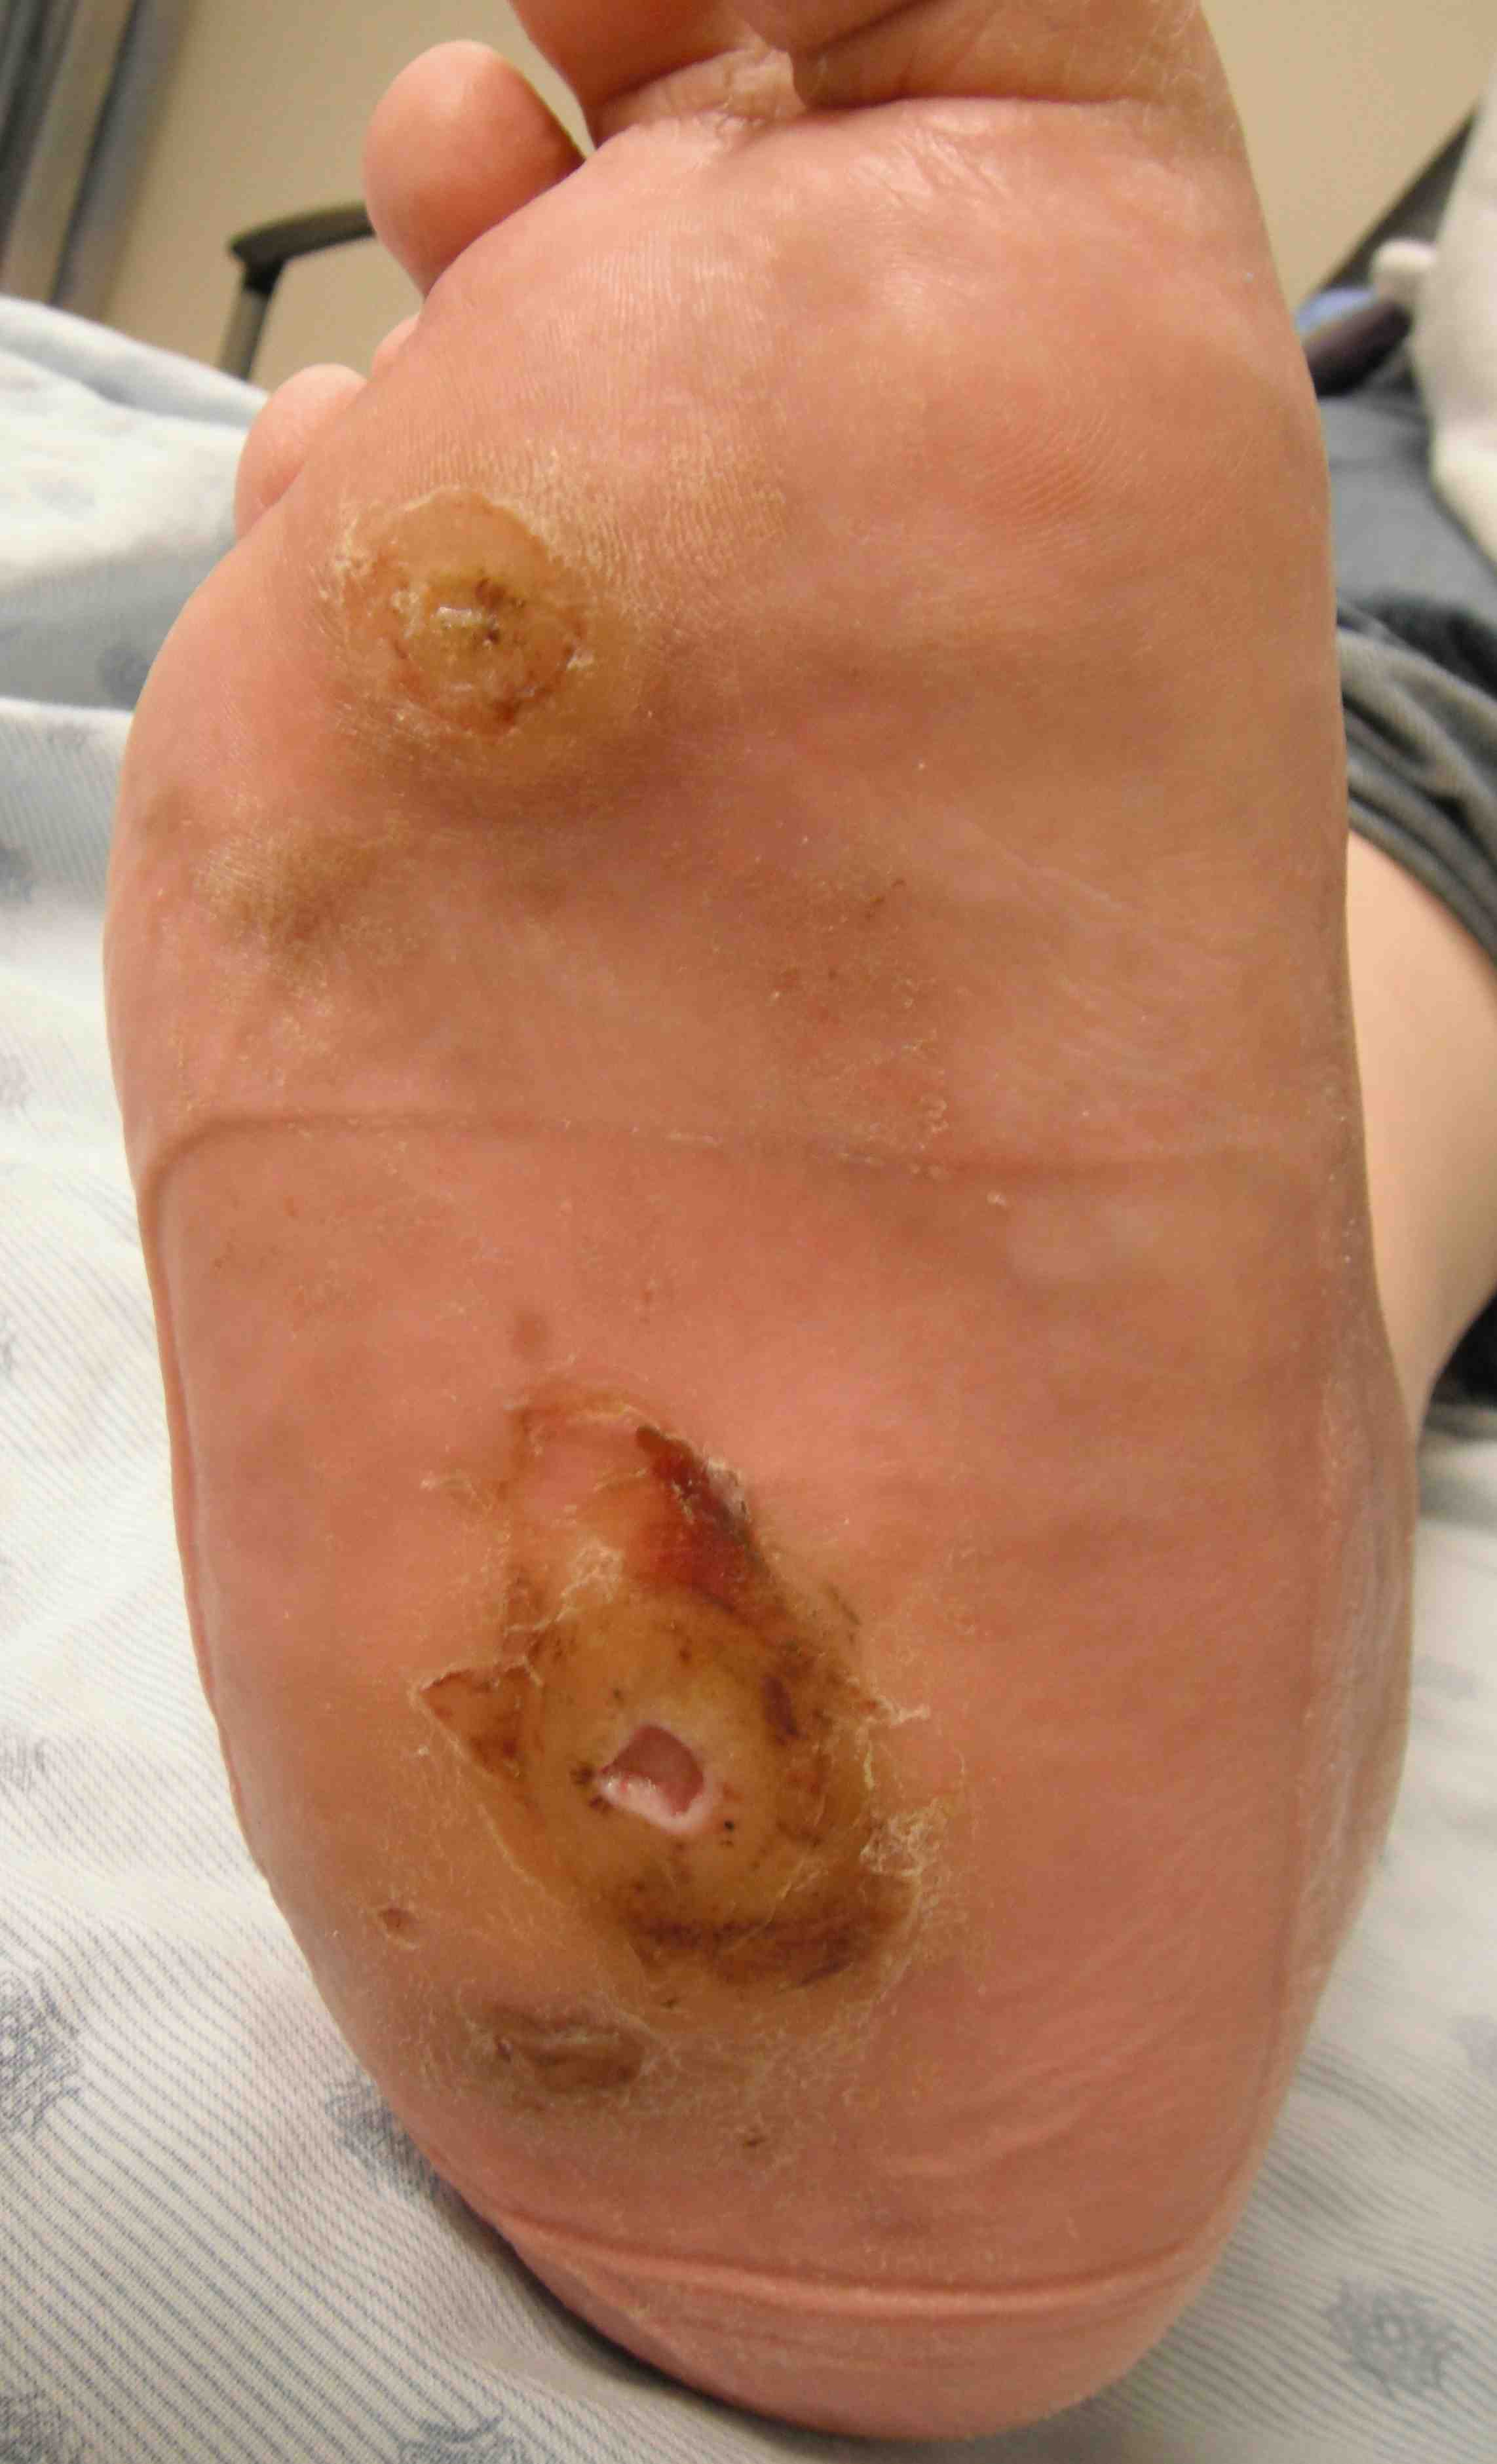 Neuropathic Midfoot Ulcers